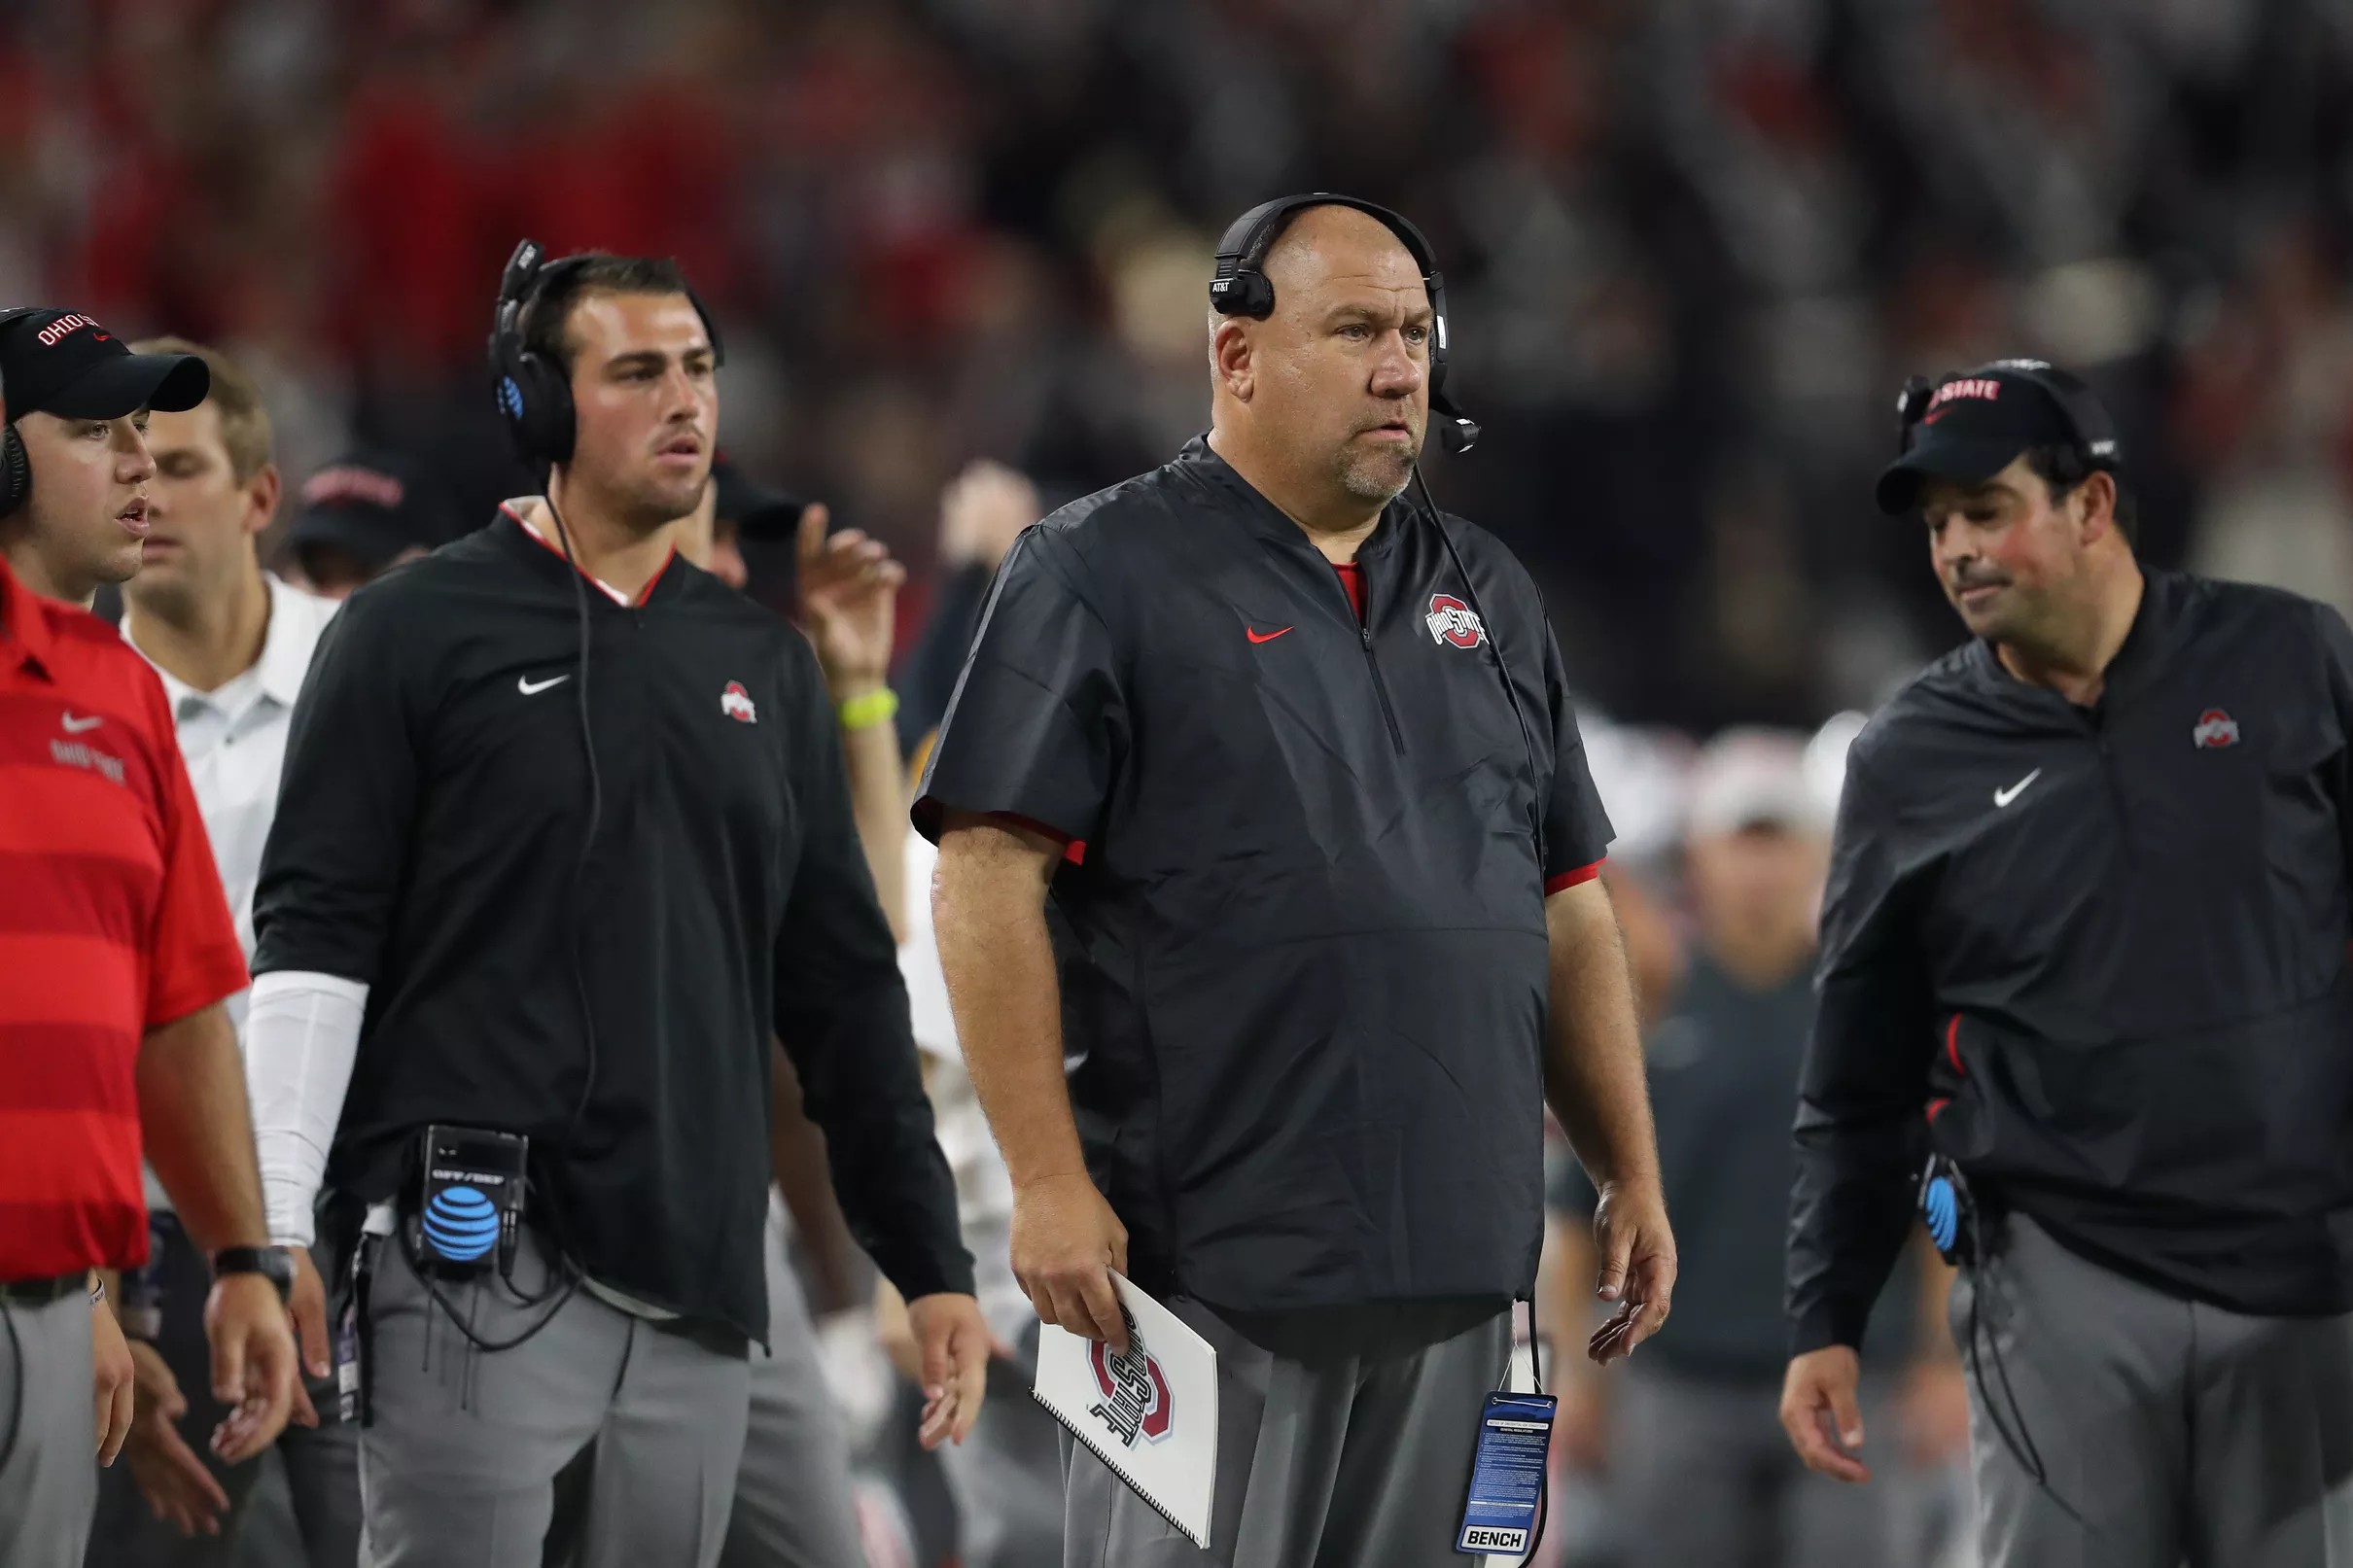 With just one true starter returning, Ohio State’s offensive line will